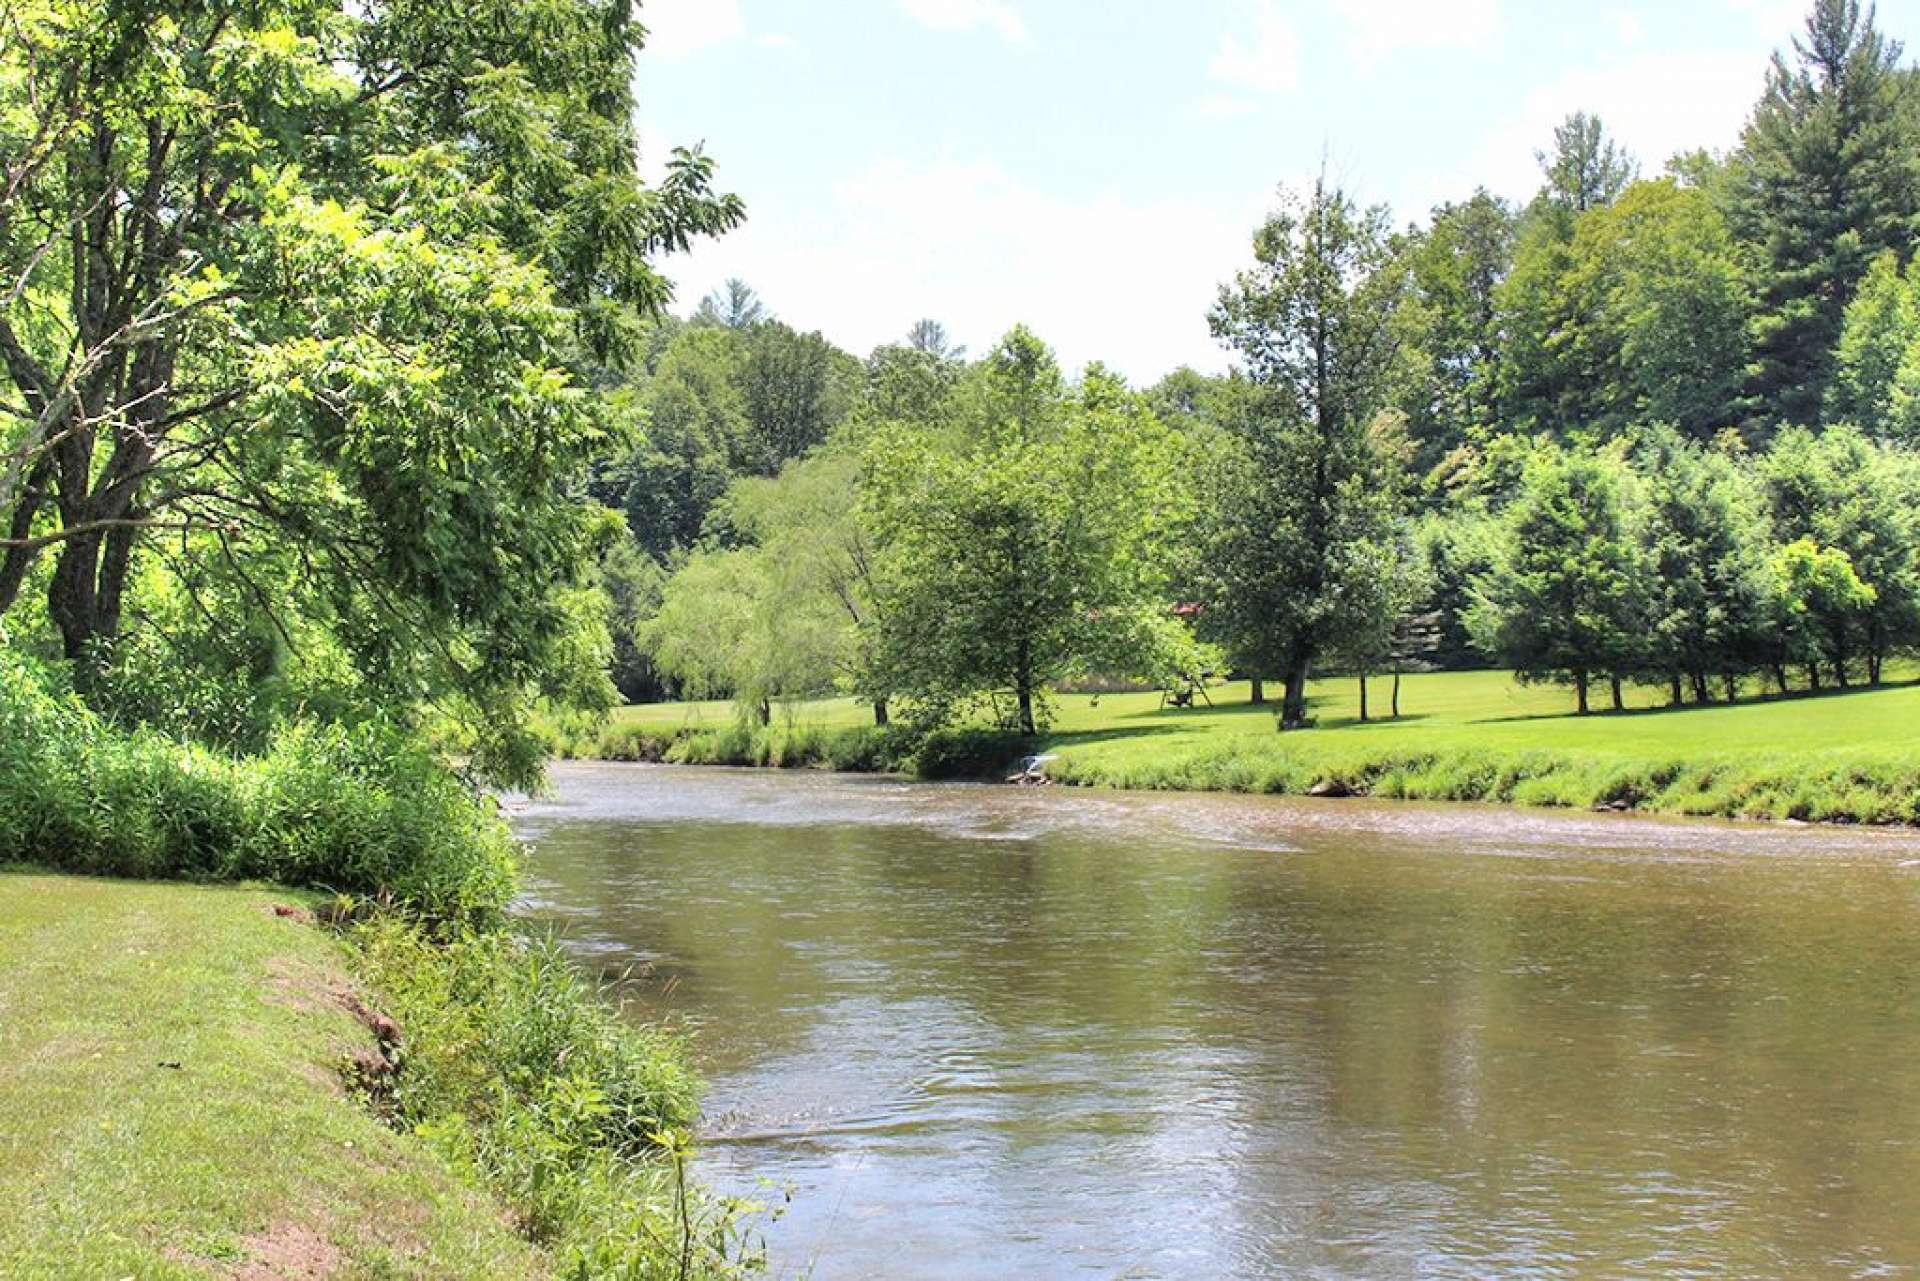 The North Fork of the New River is the smallest of the two forks and is a great fishery for small mouth bass and trout in addition to being an easy river for canoeing and kayaking.